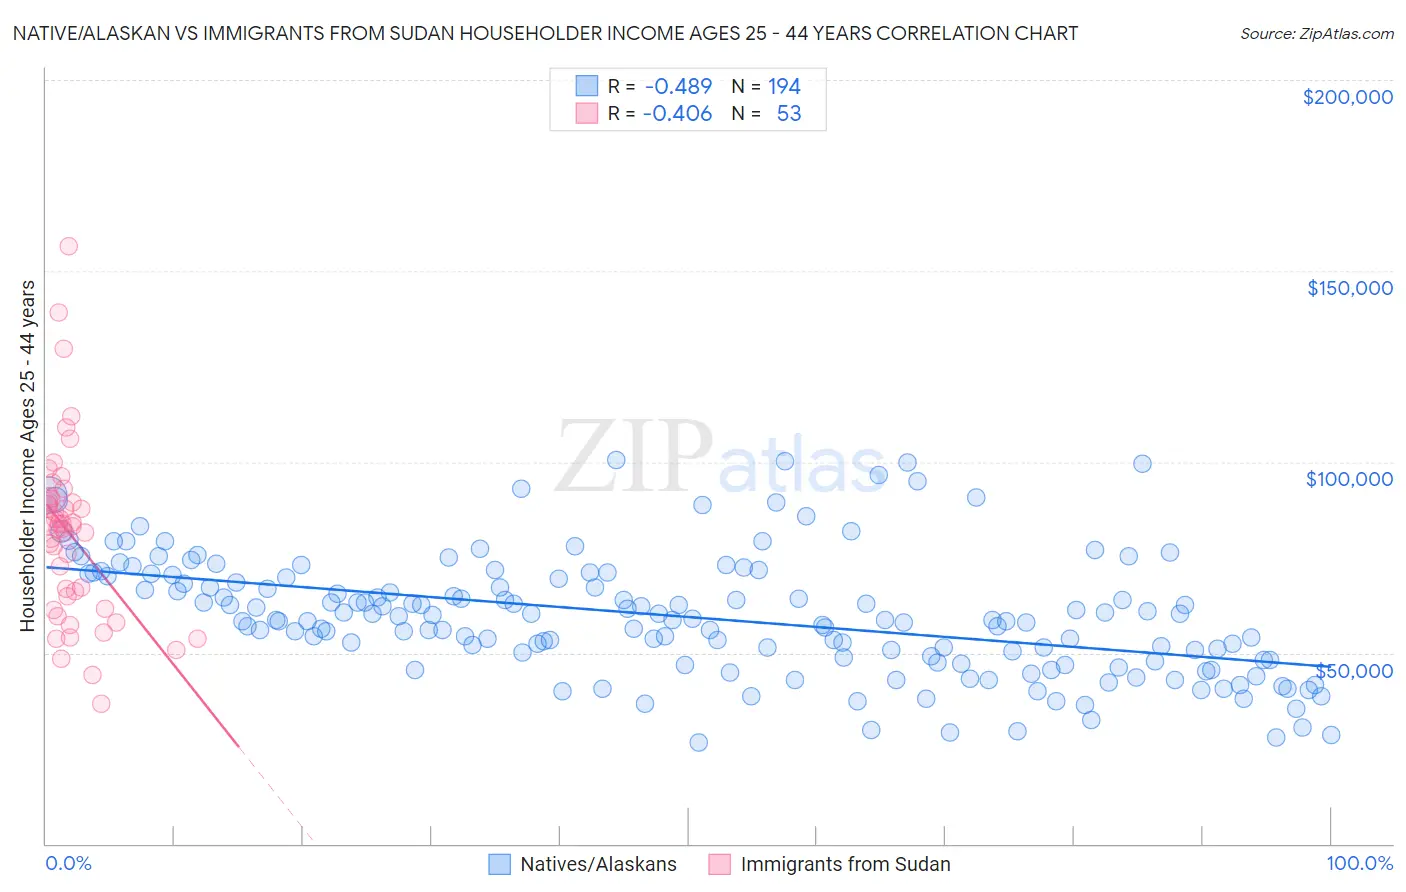 Native/Alaskan vs Immigrants from Sudan Householder Income Ages 25 - 44 years